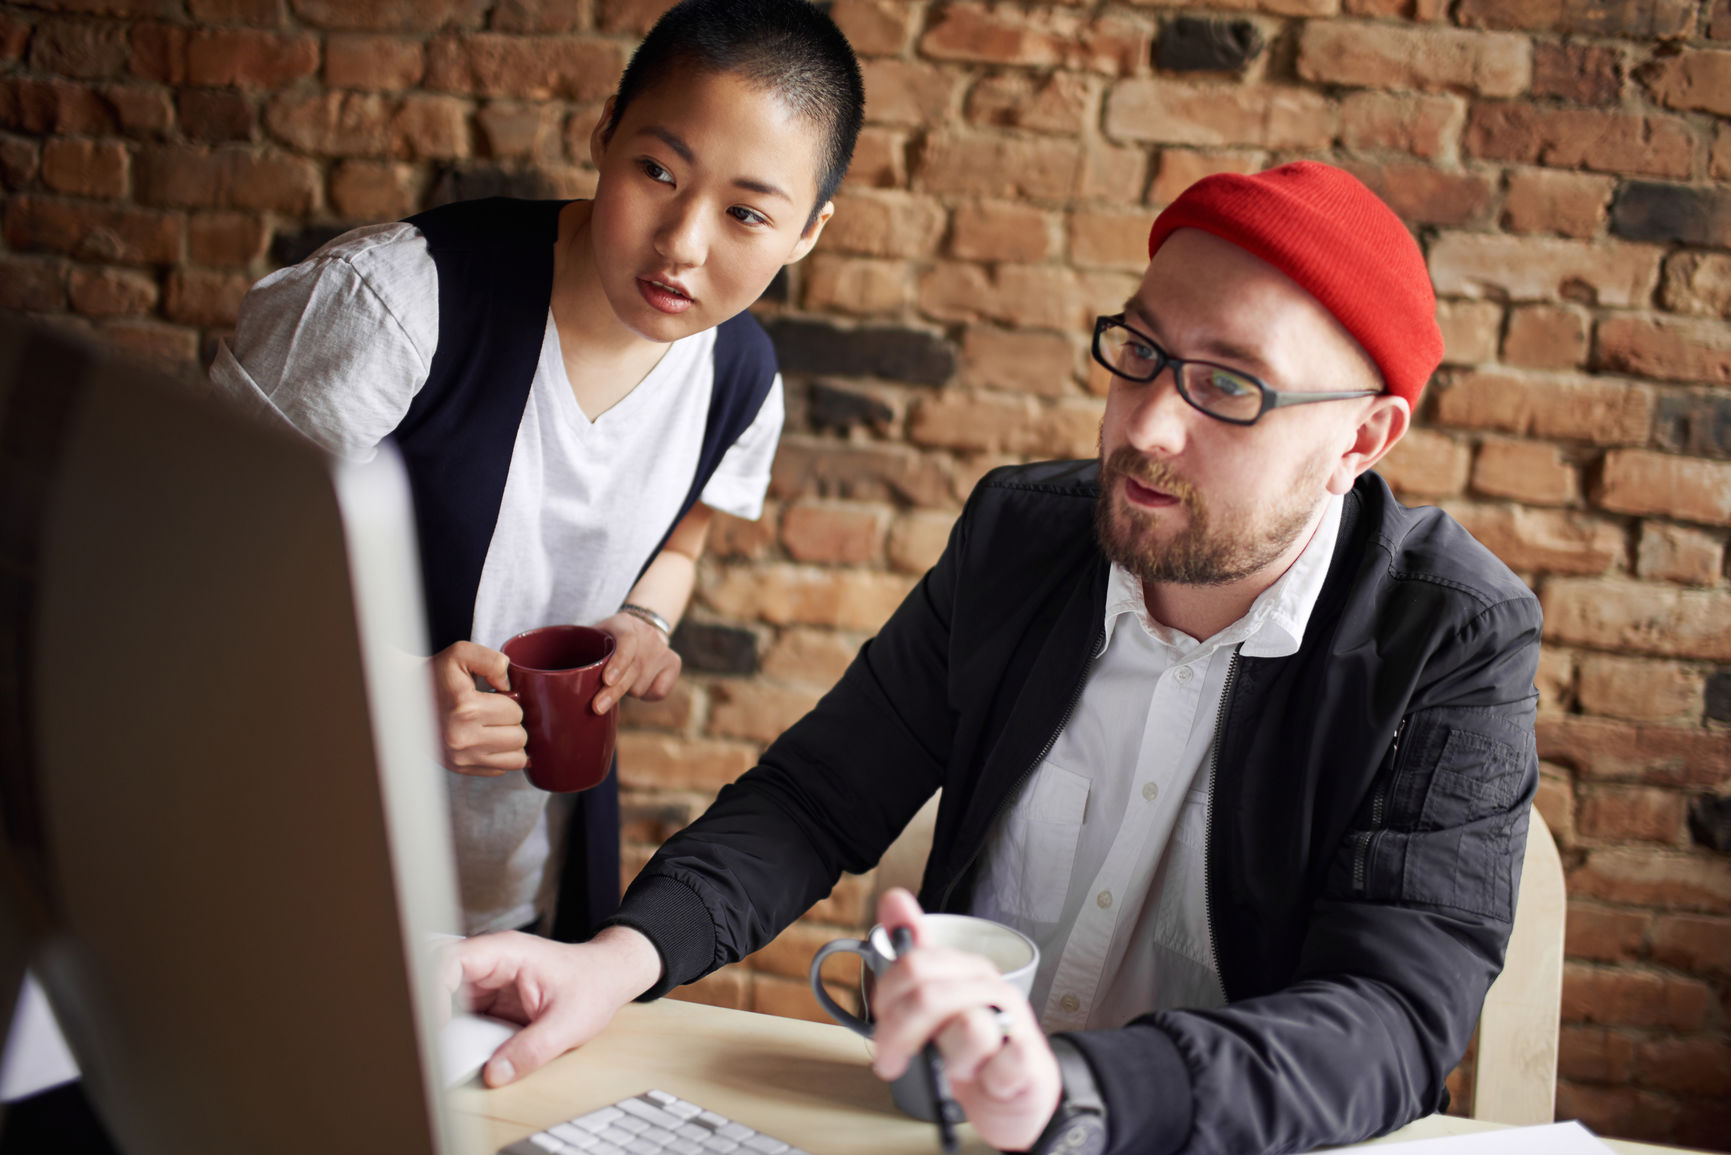 Male art director and his enthusiastic female coworker looking at computer screen attentively against brick wall background